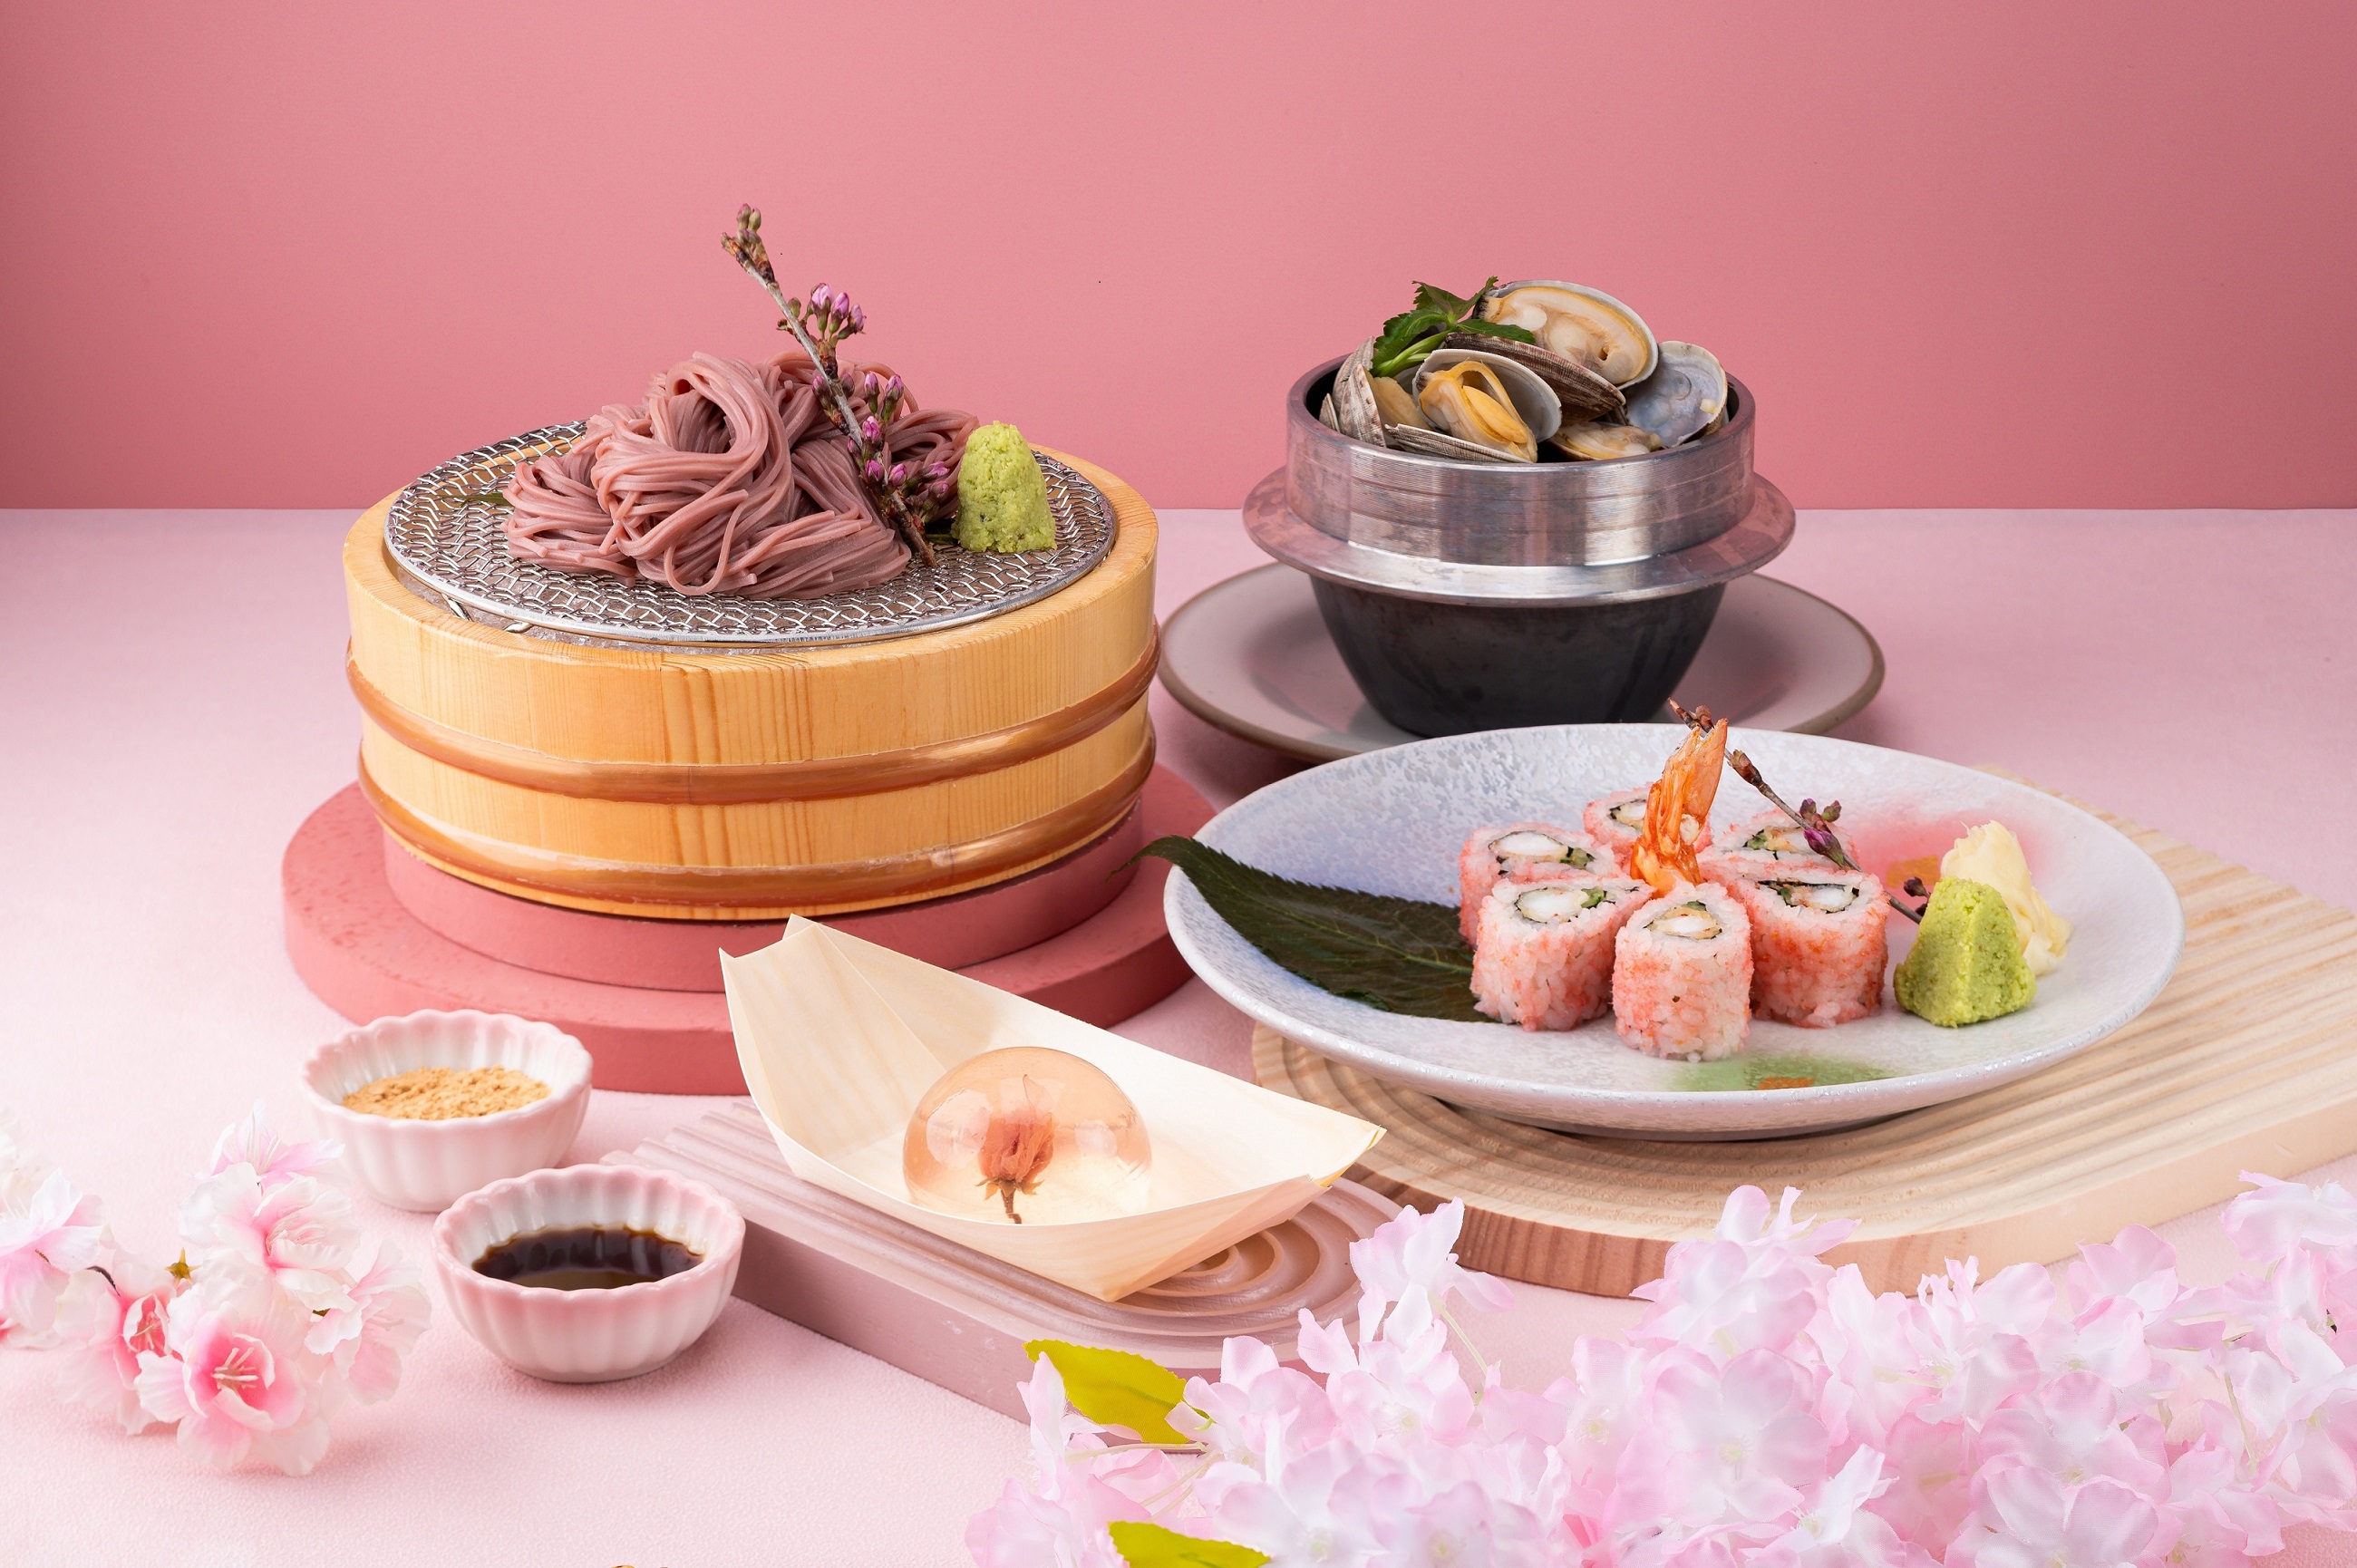 Kyo Watami, the newly opened restaurant celebrated for its authentic Japanese fare, unveils a curated selection of sakura-inspired dishes, complemented by limited-edition sake, sakura cocktails, and mocktails.